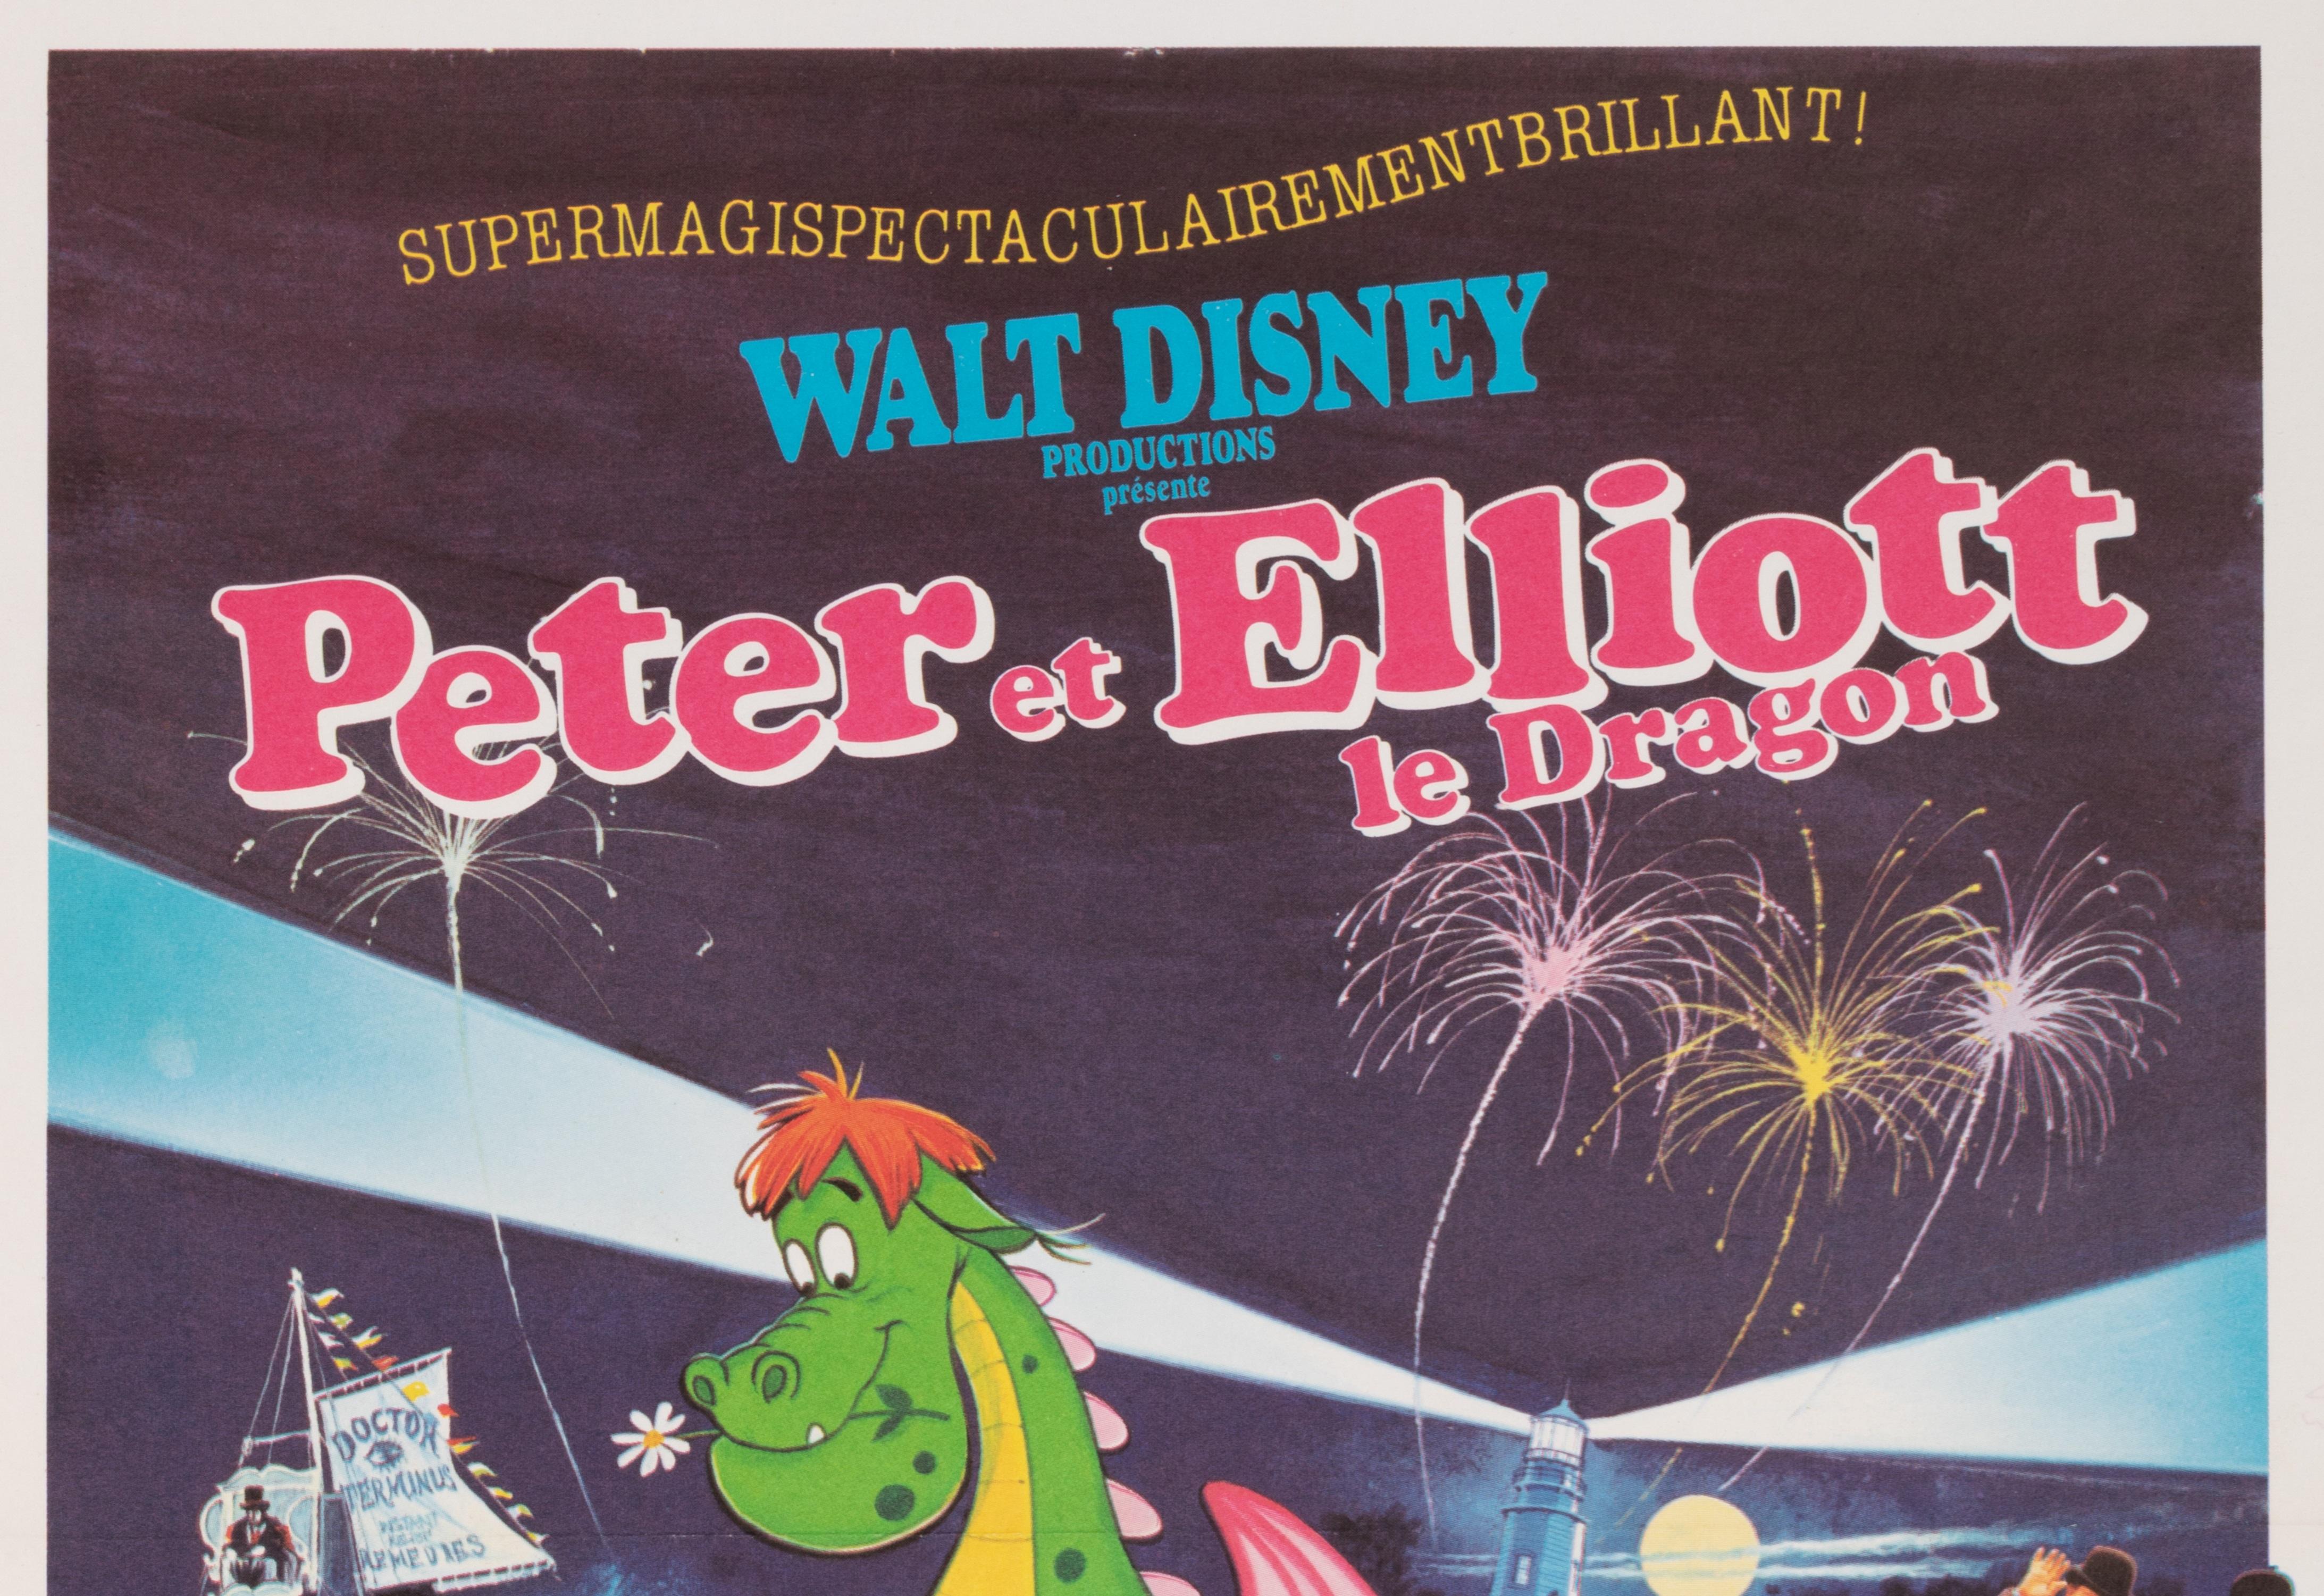 Walt Disney Poster for the promotion of the animated film Peter and Elliott. 

Artist: Anonymous
Title: Peter et Elliott – Le Dragon
Date: circa 1980
Size (w x h): 15.7 x 21.7 in / 40 x 55 cm
Printer: Ets St martin Imp, 92 Asnieres
Materials and